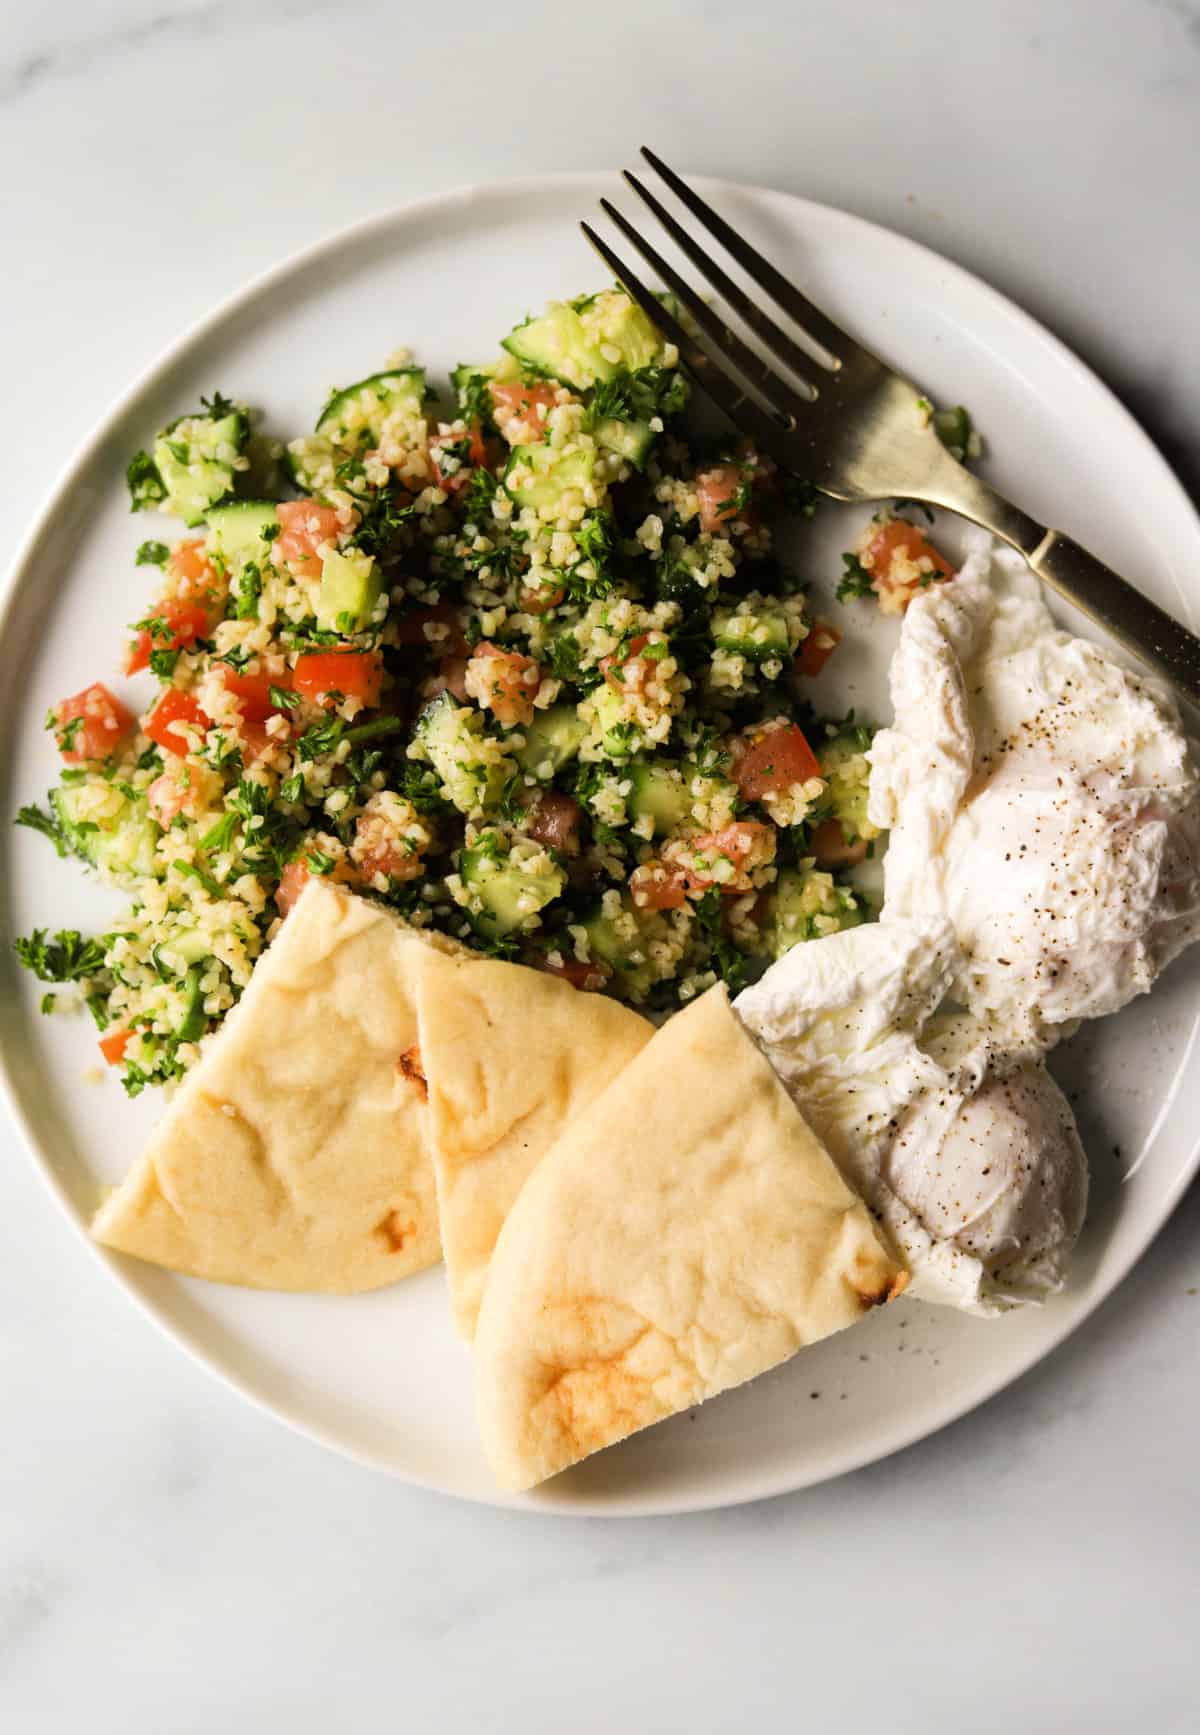 An overhead shot of a plate of tabouli with poached eggs and wedges of pita.